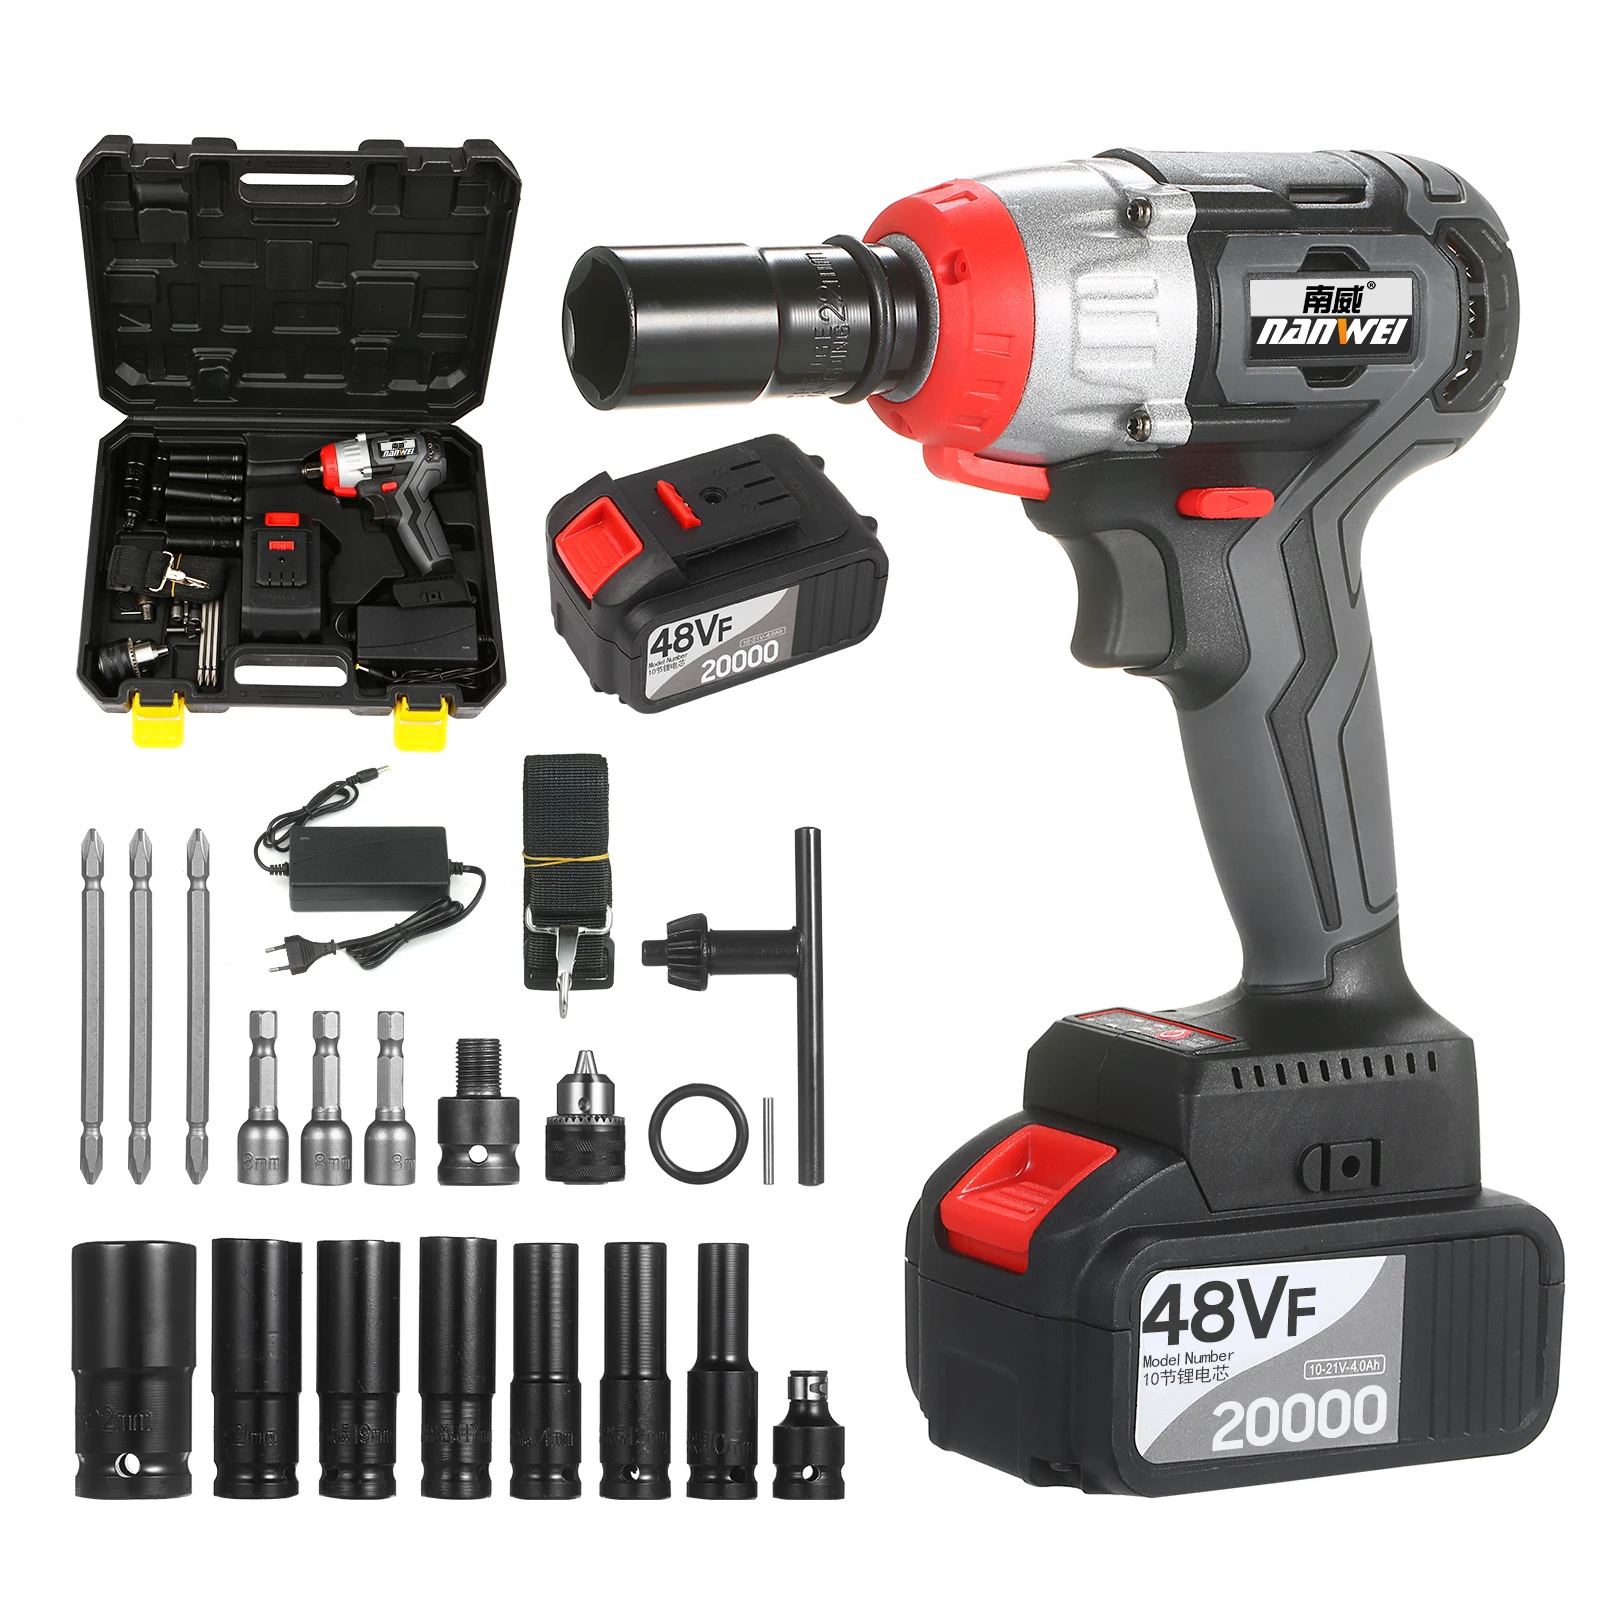 Electric Driver Brushless 18V Max Lithium-Ion 1/2 Inch Cordless Wrench Kit Dual Speed Fast Charge Case & 4 Sizes Sockets 14mm 17mm 19mm 22mm Autofu Cordless Impact Wrench Kit 